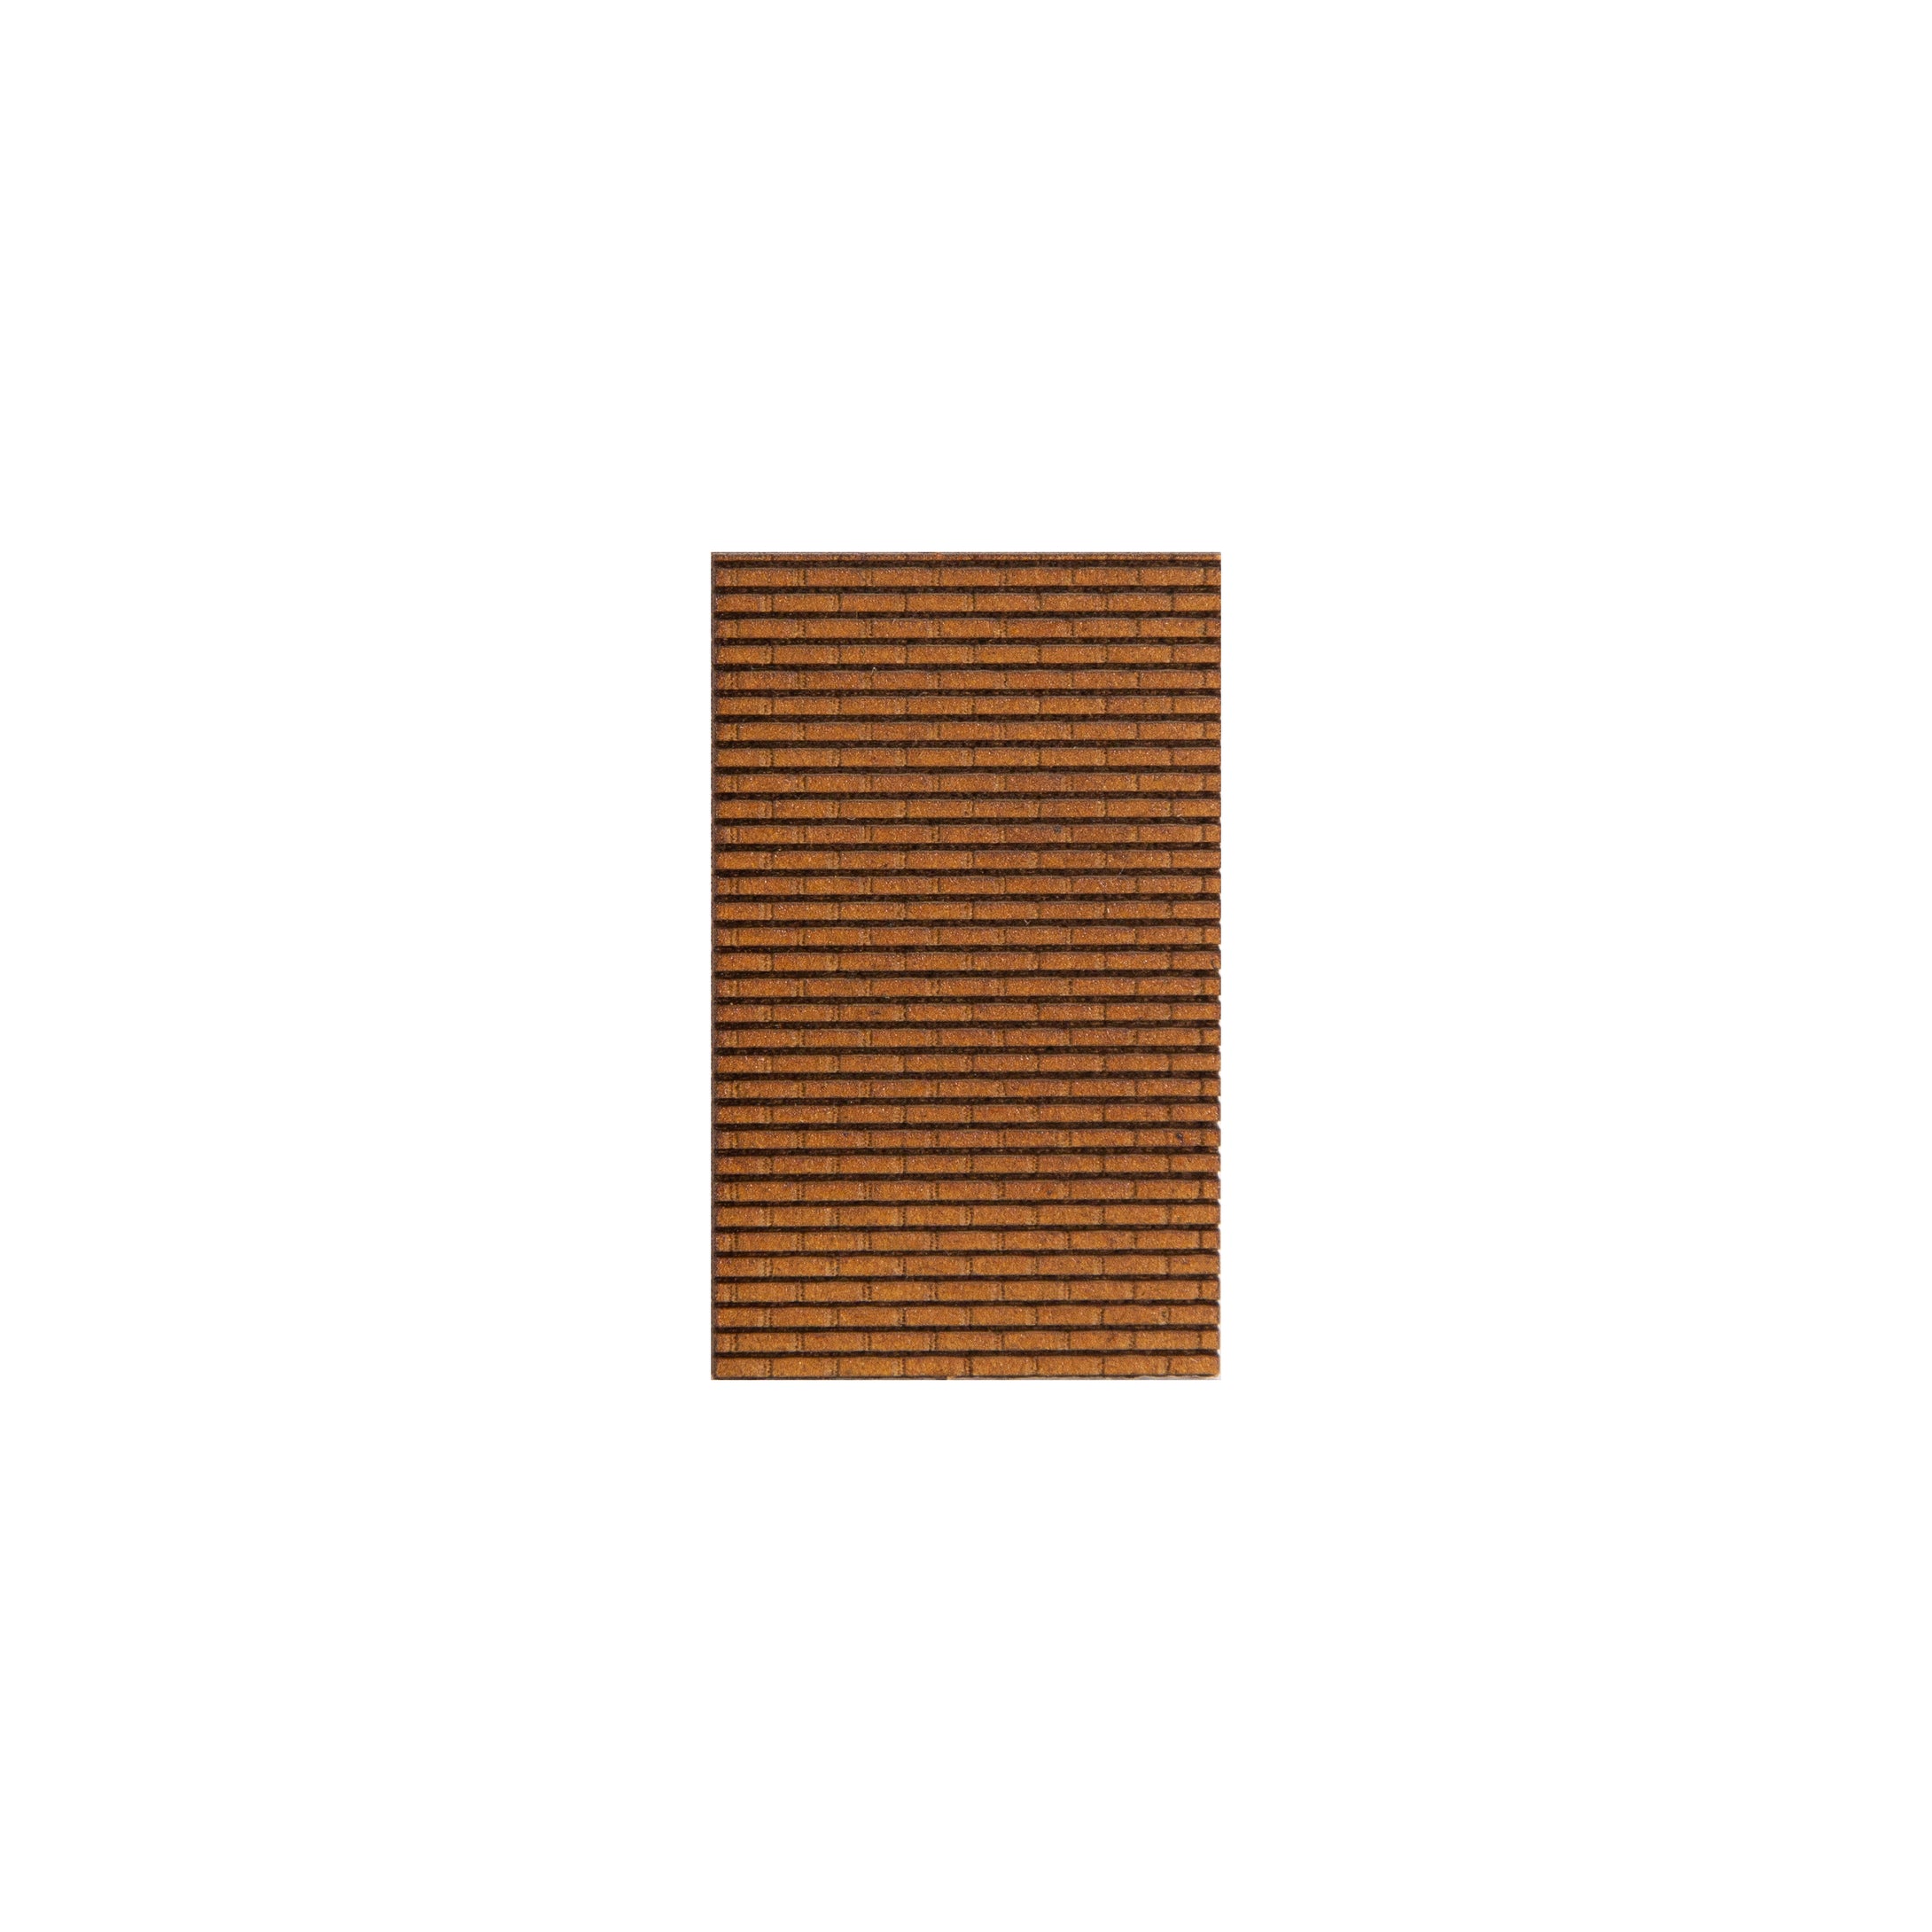 LP141 - HO Scale - Brick panel insert 0 openings - fits opening size E